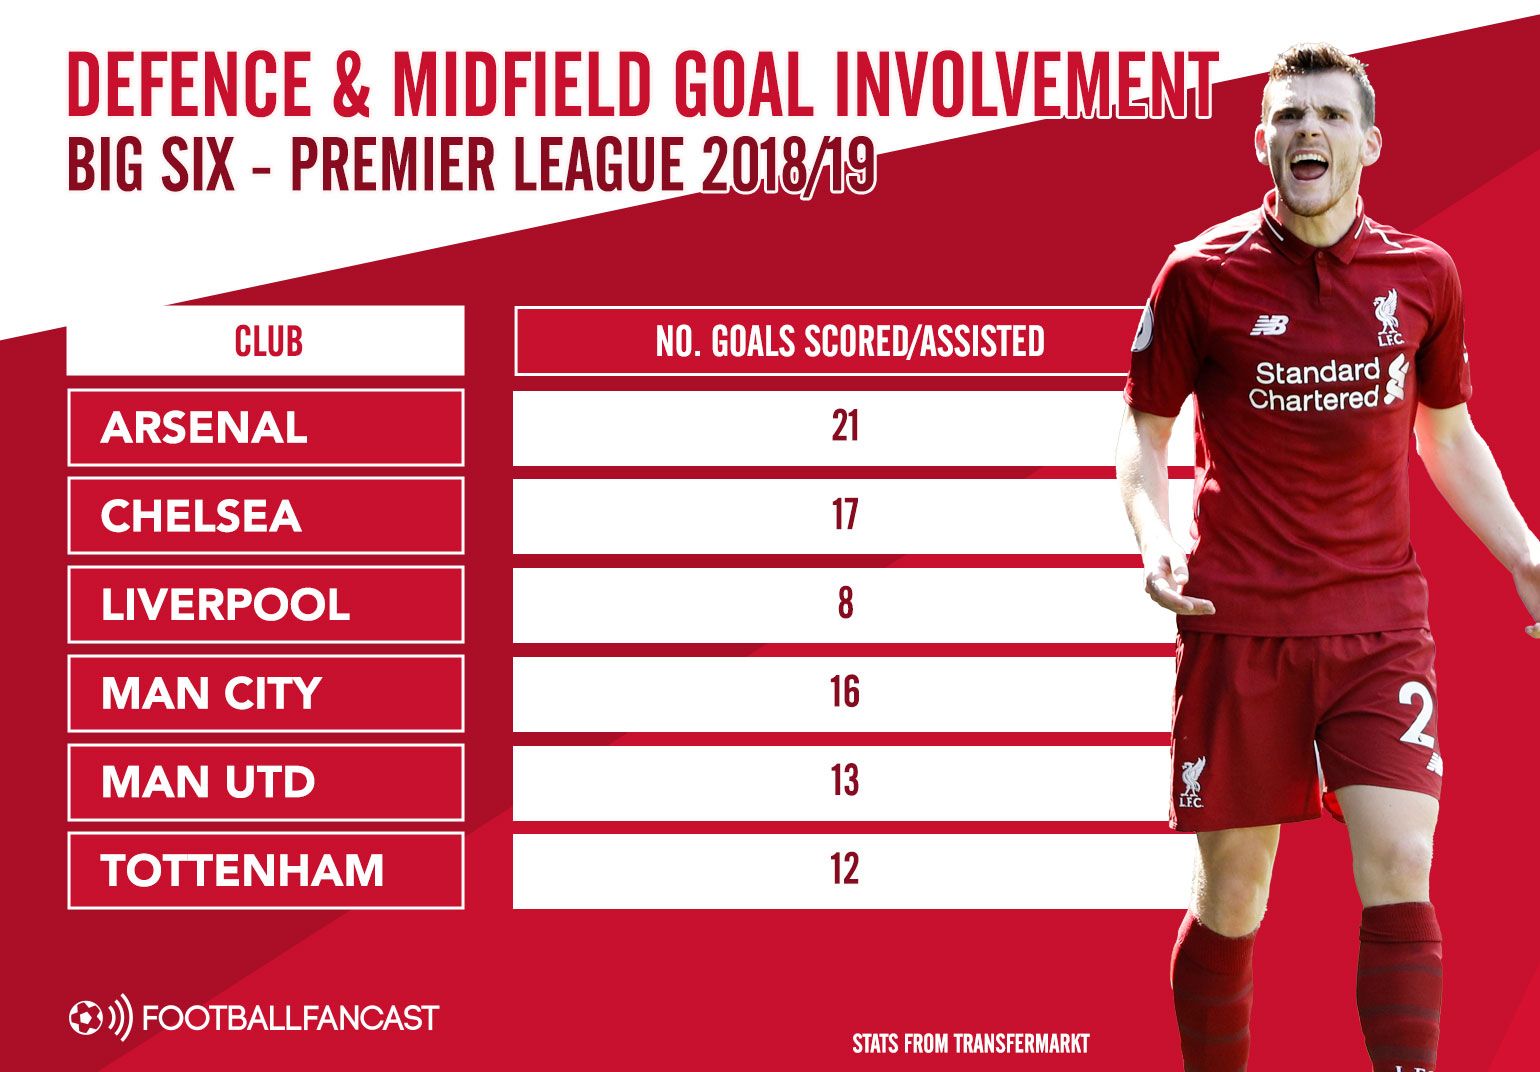 Goal Involvement from defence and midfield this season